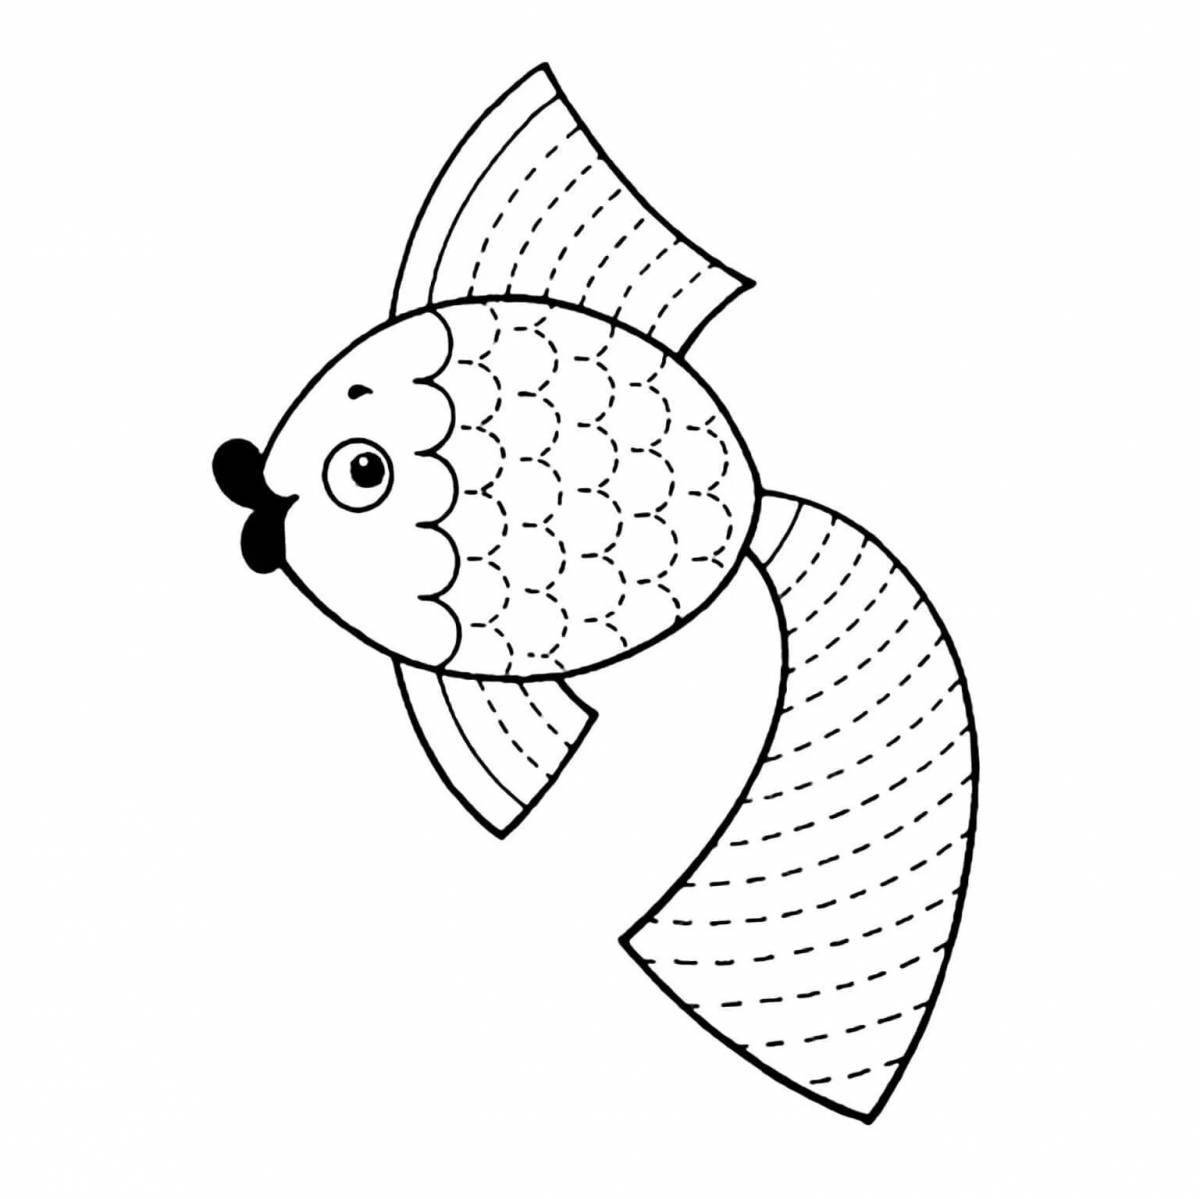 Impressive goldfish coloring book for 4-5 year olds